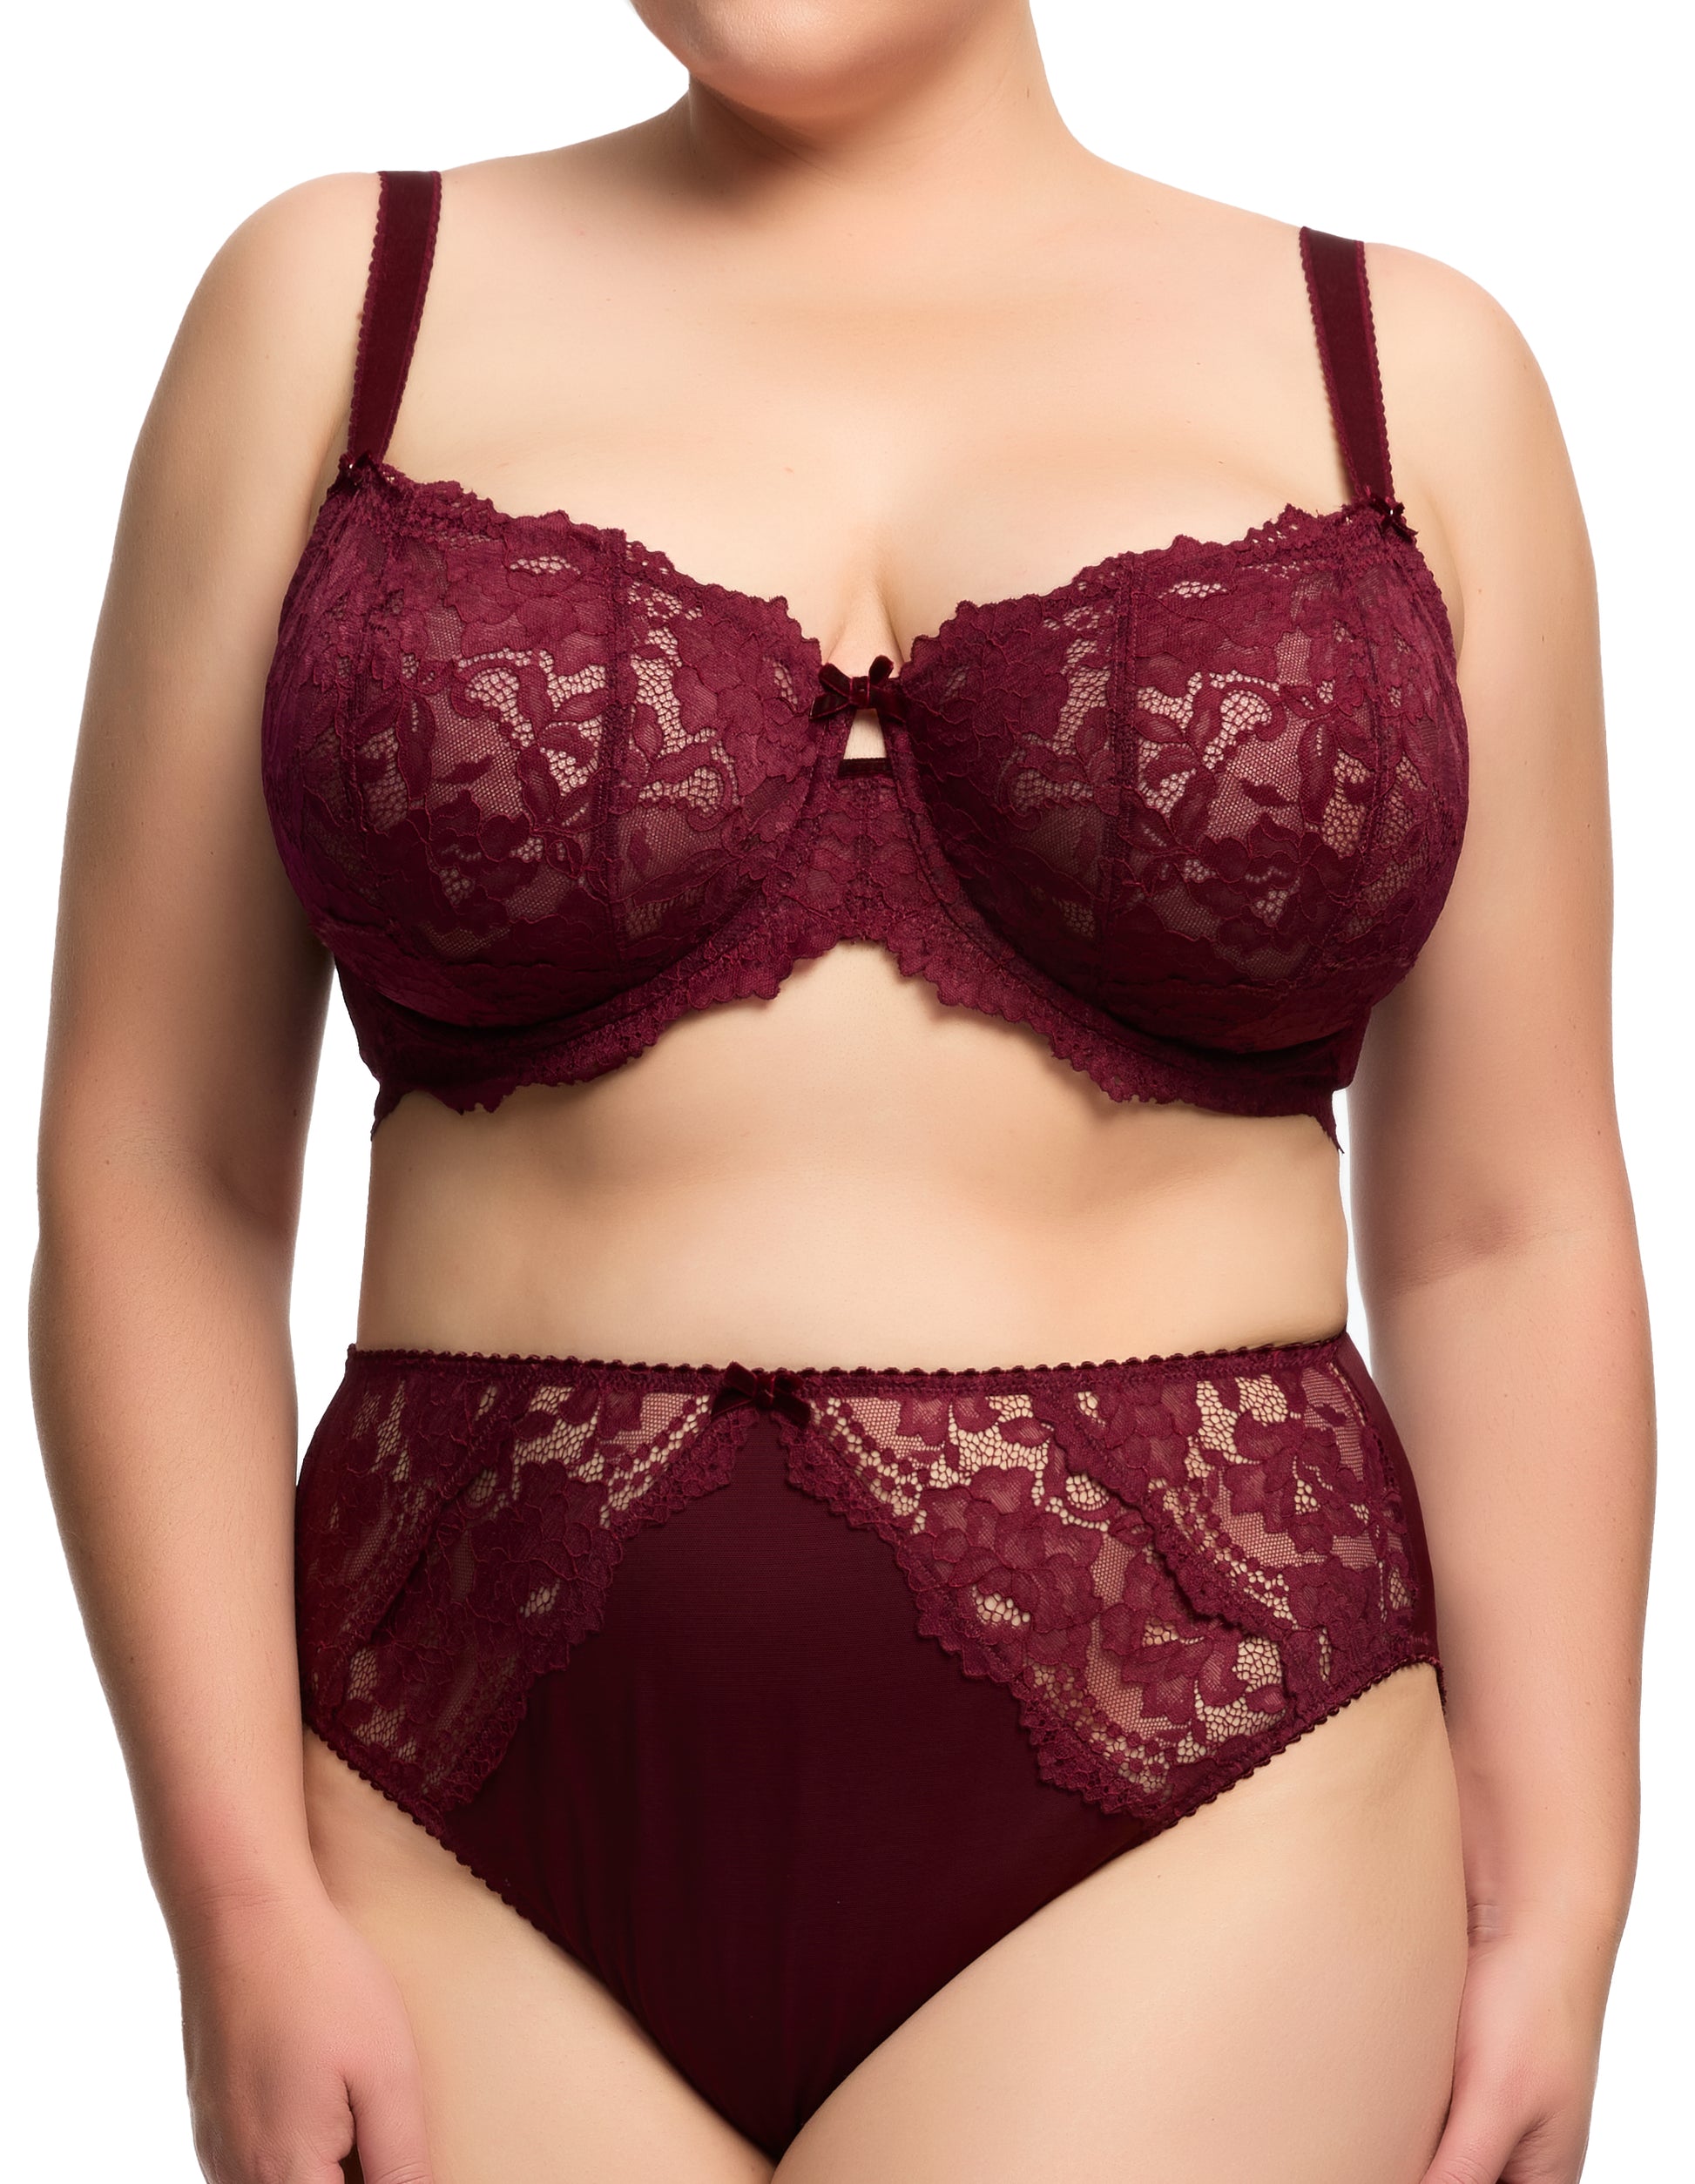 Gift Set: Burgundy Chemise with Lace Top Thigh Highs + Panty